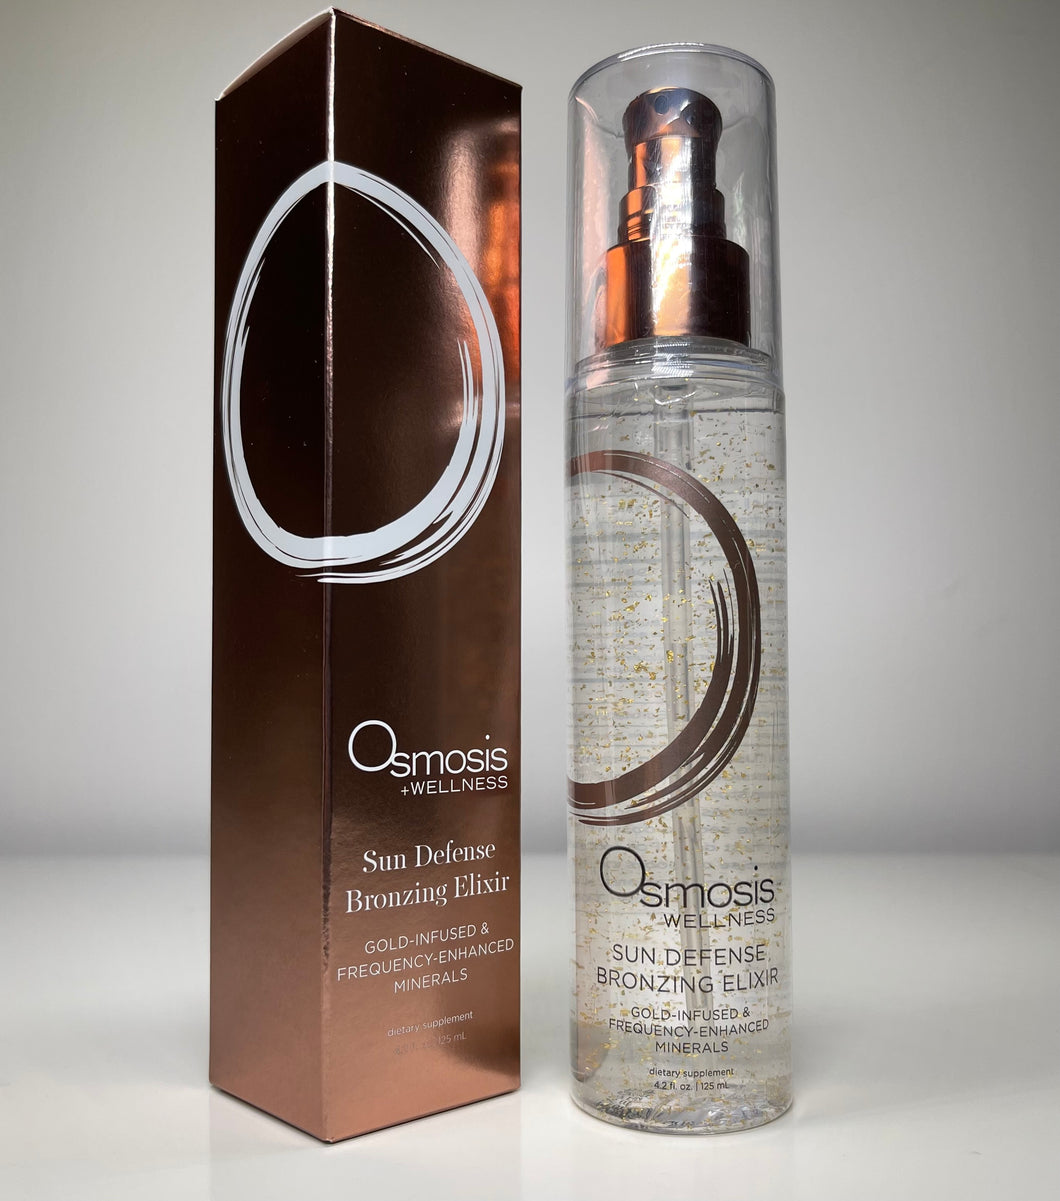 Osmosis Sun Defense Bronzing Elixir Gold Infused & Frequency Enhanced Minerals - European Beauty by B